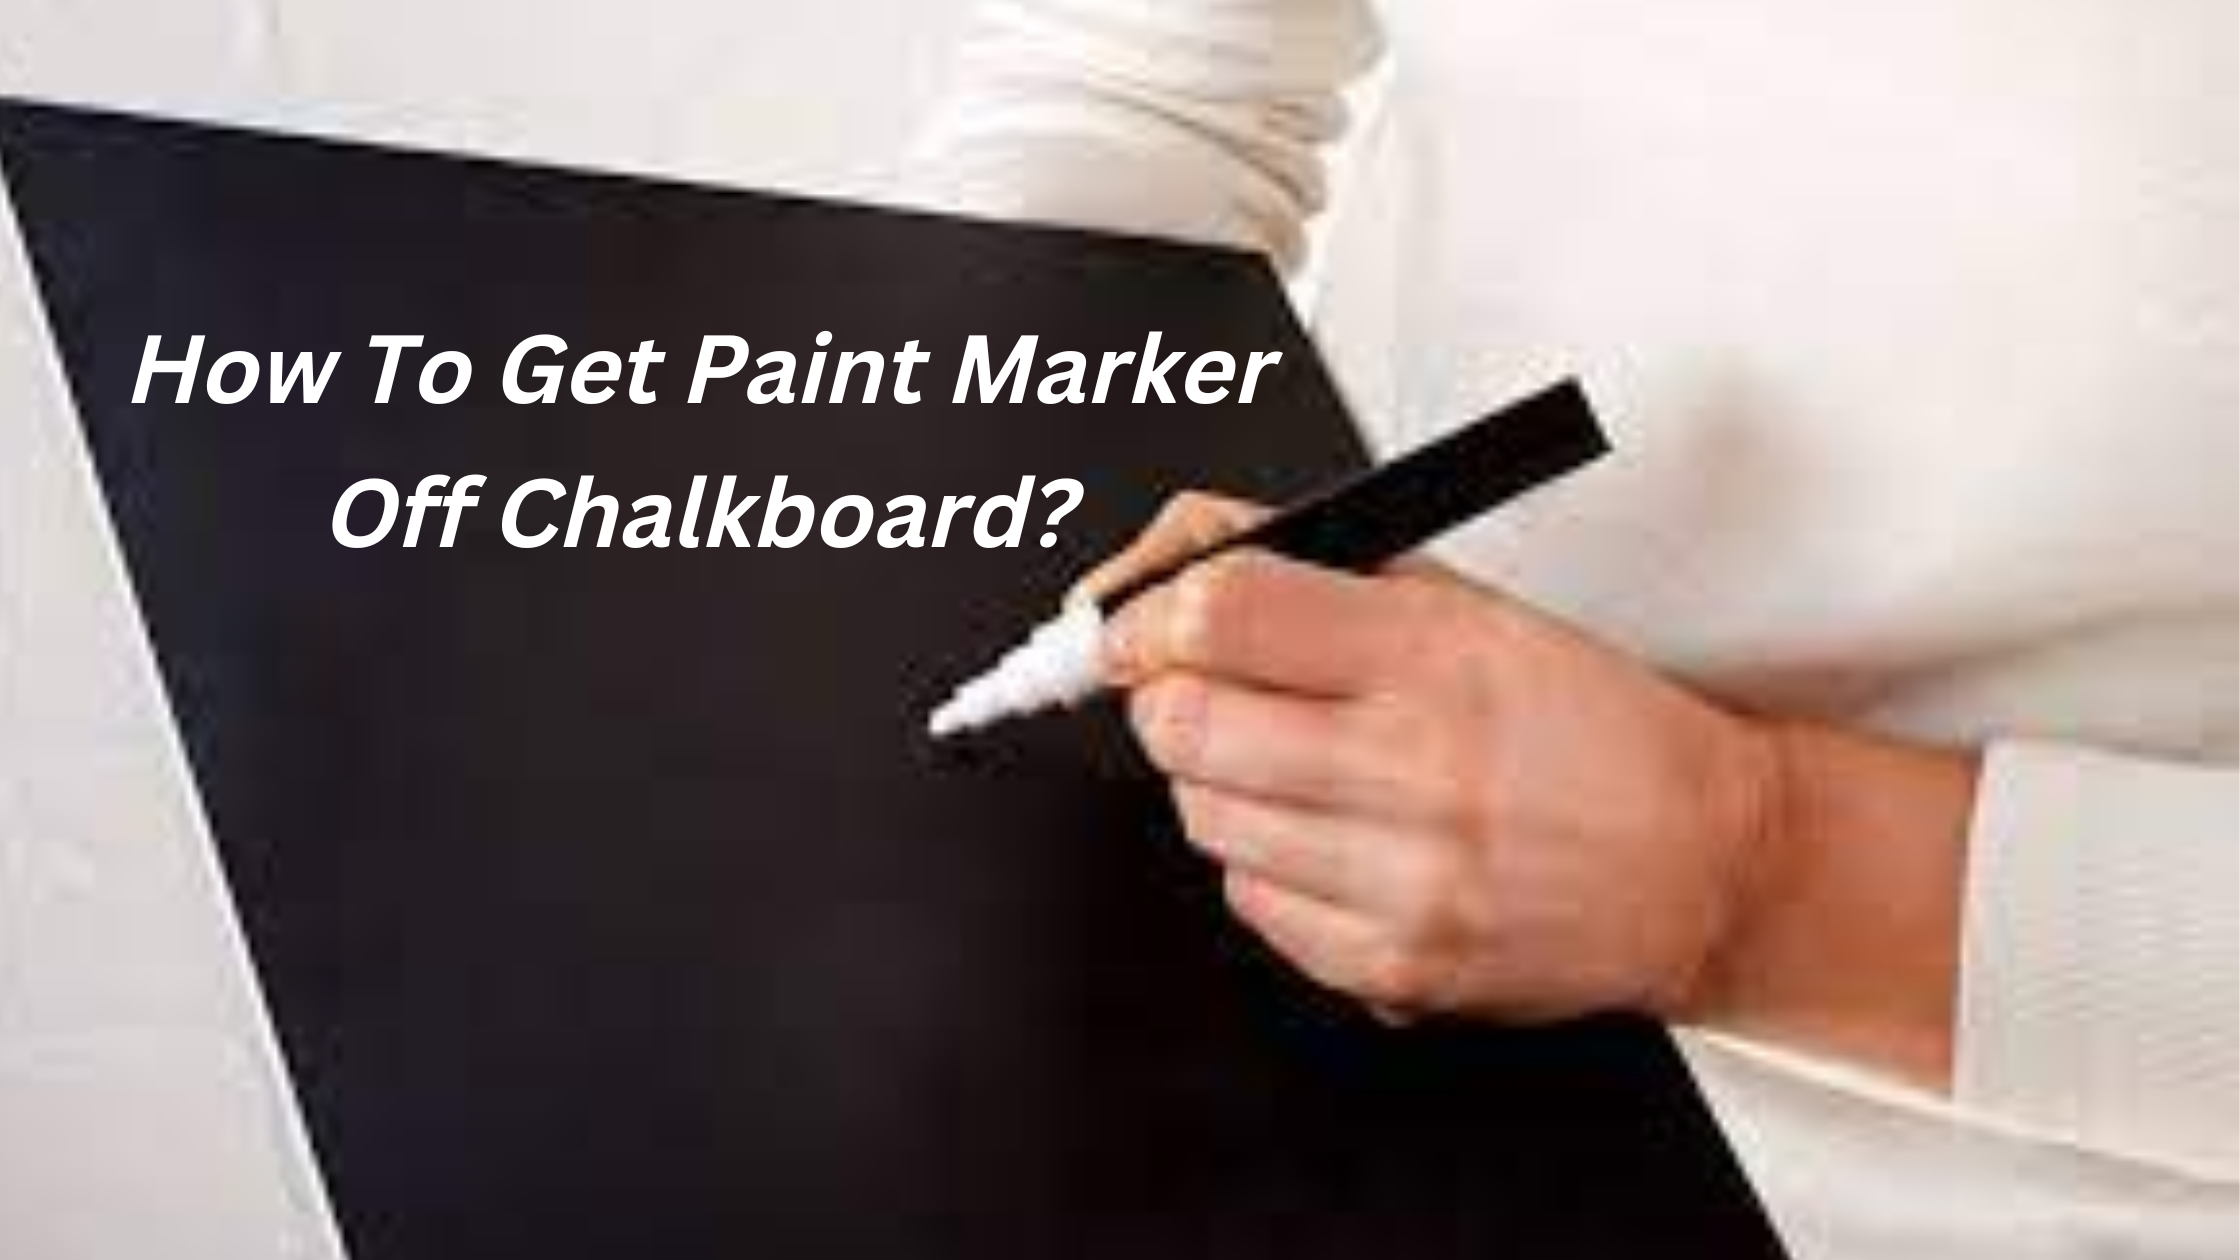 How To Get Paint Marker Off Chalkboard?